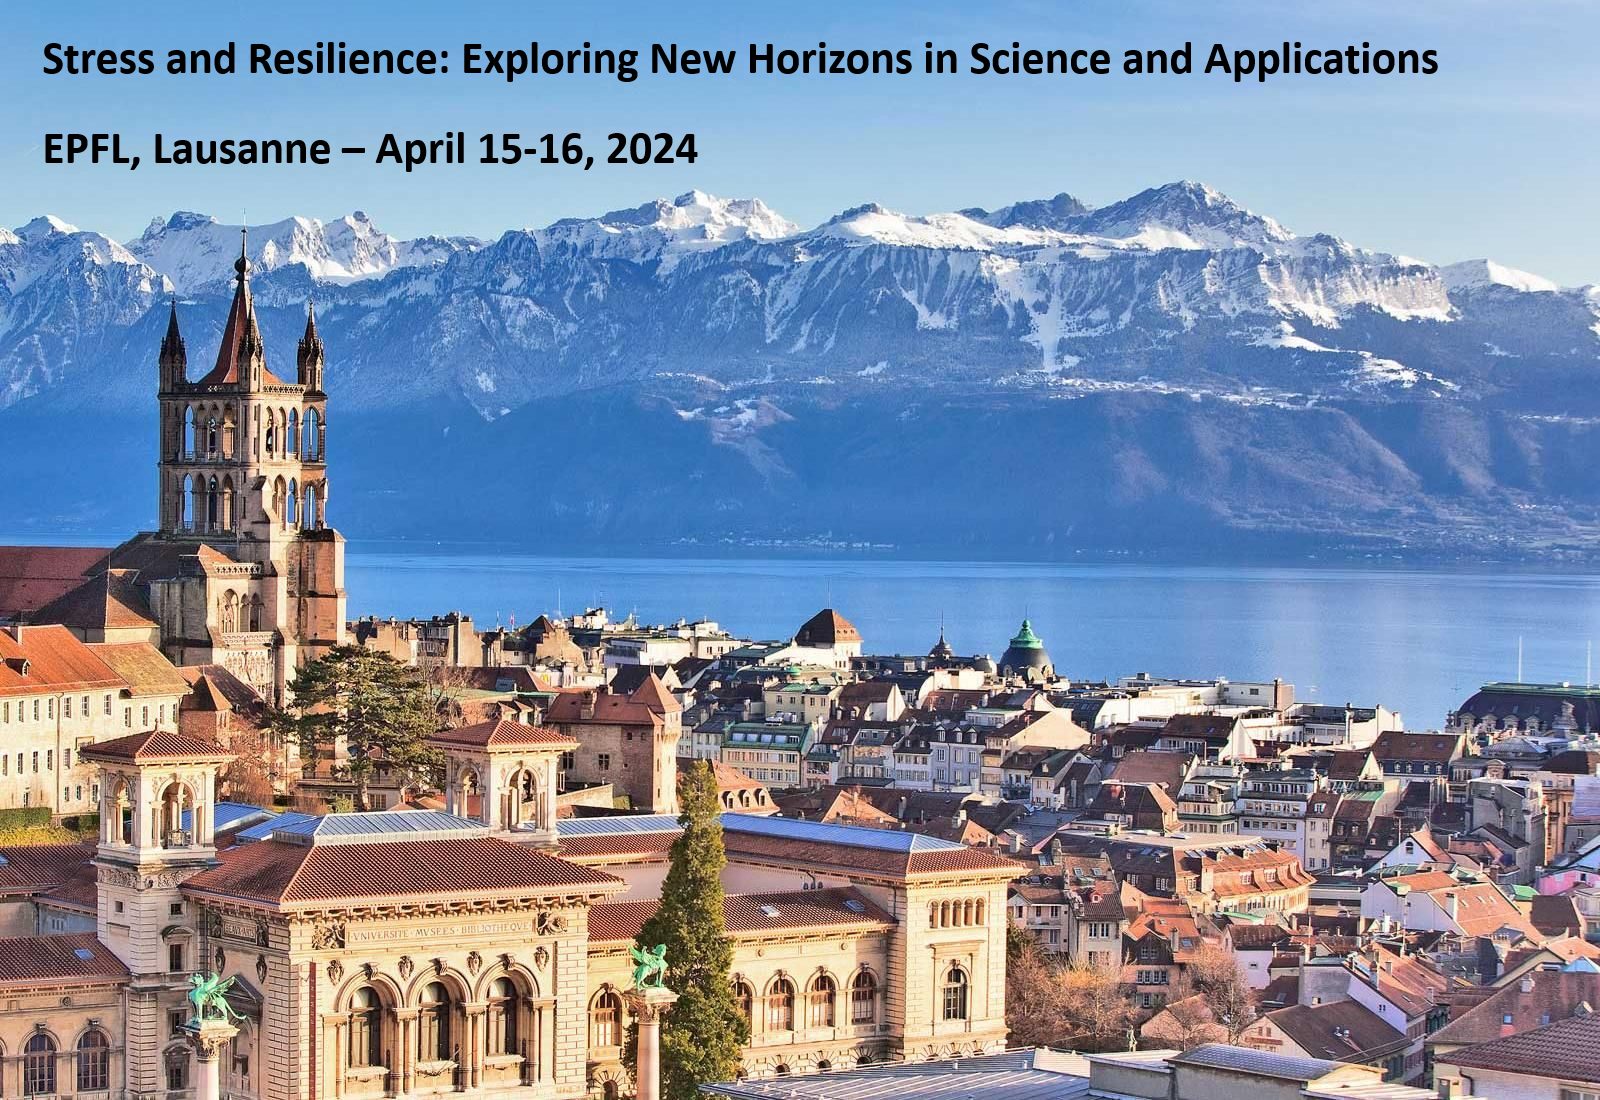 Stress and resilience meeting 2024